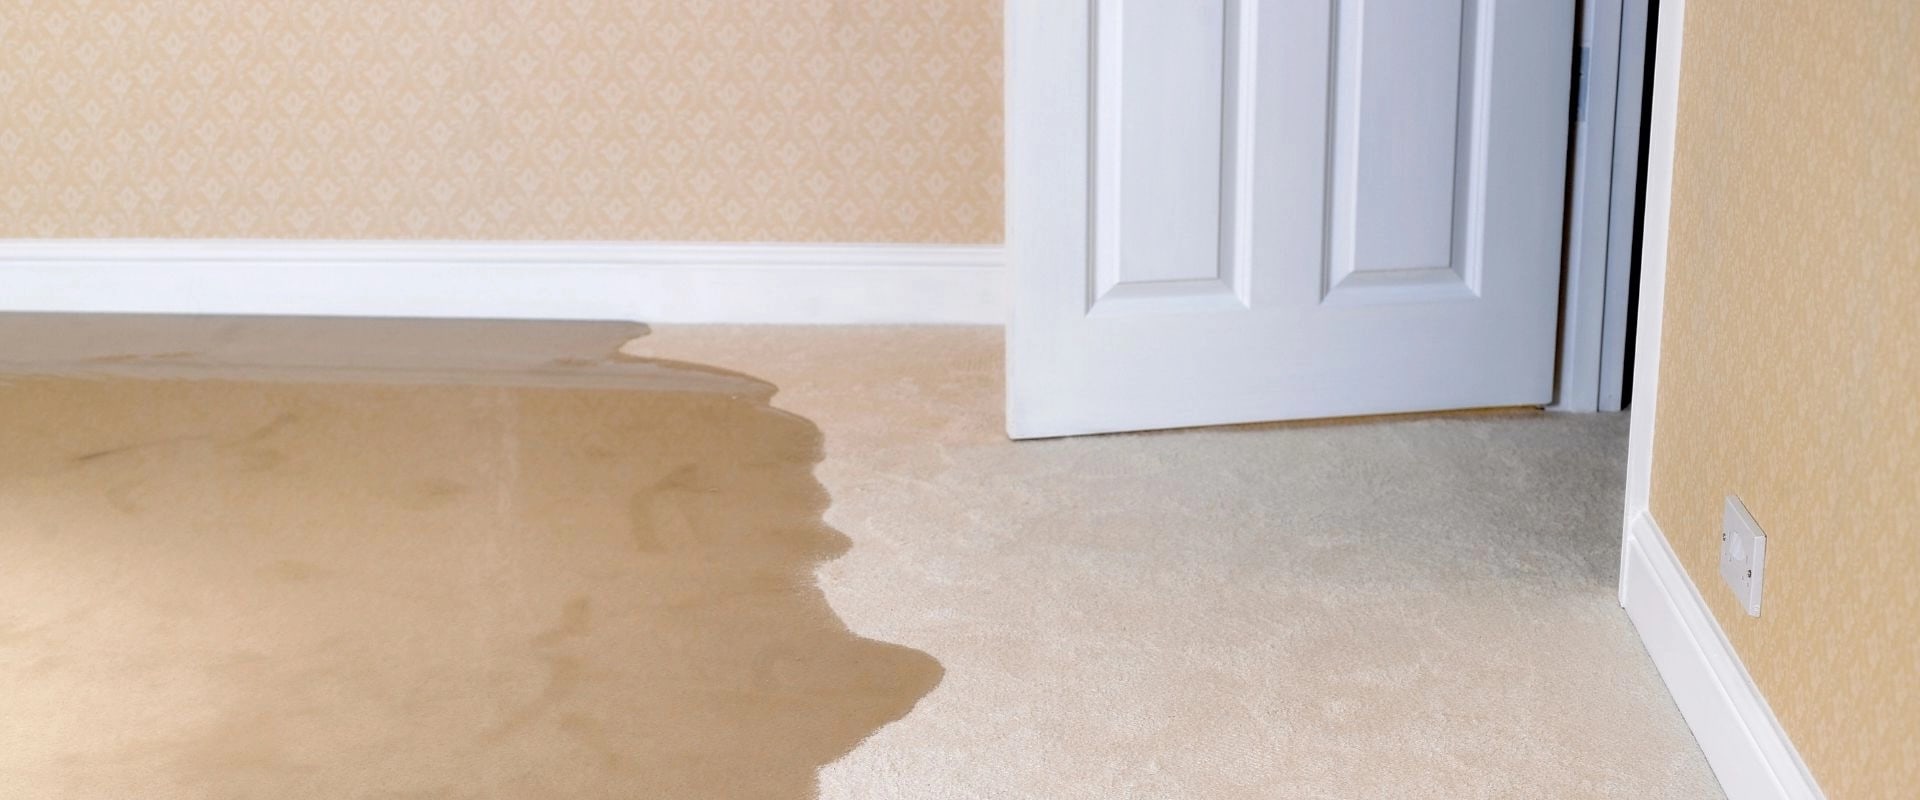 How long can water damage last?